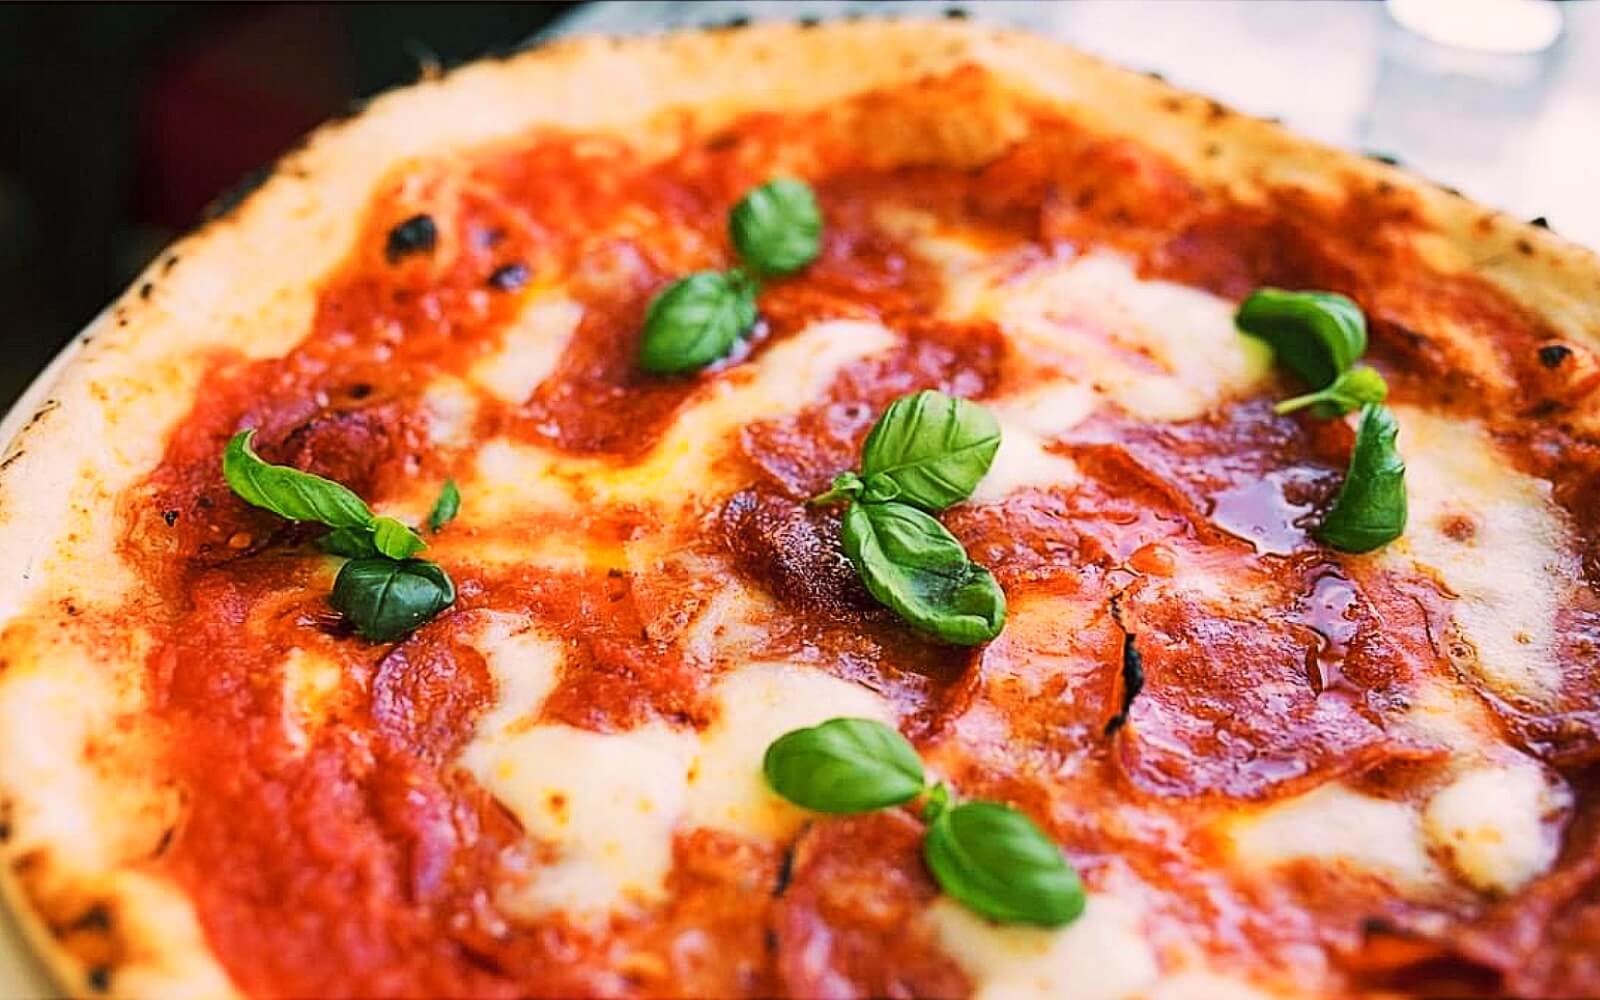 The Margherita pizza at Nicli Antica Pizzeria, Gastown